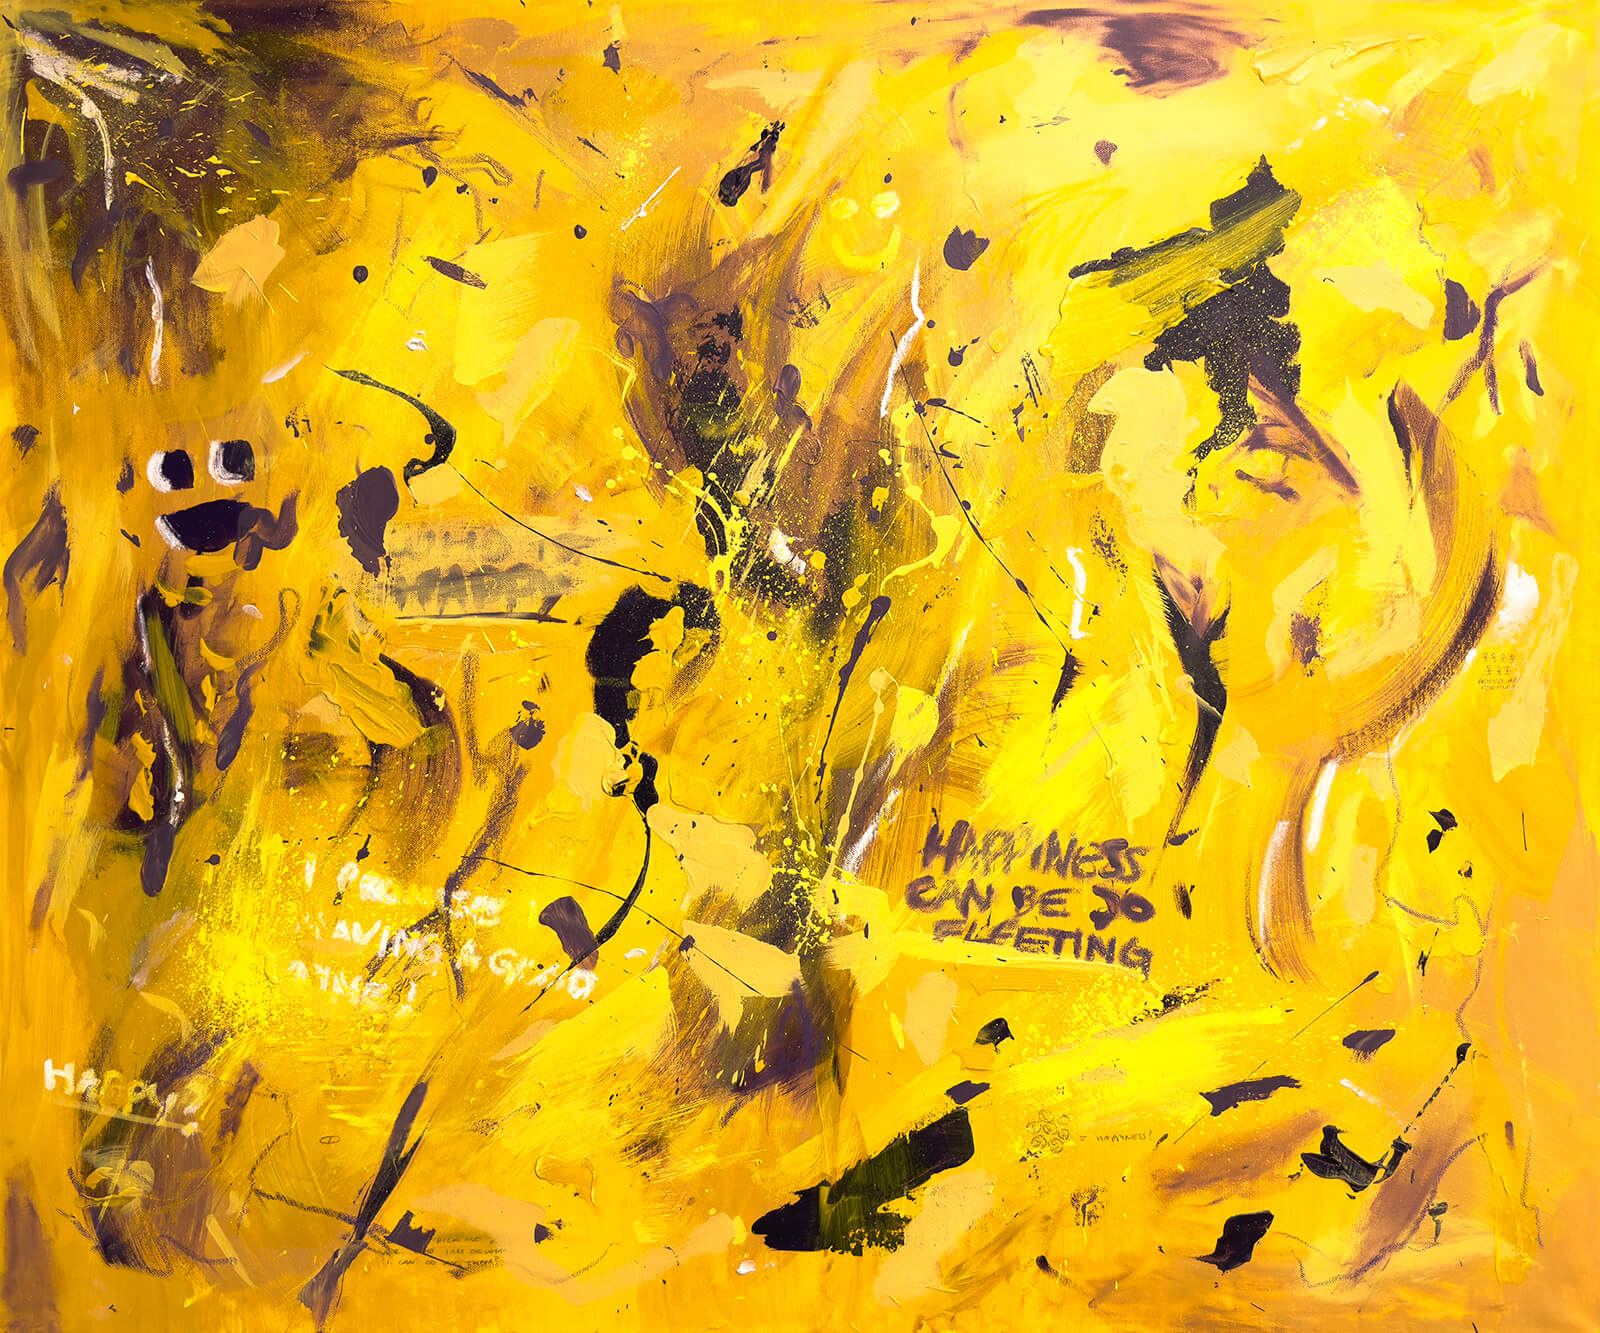 An expression of joy on a yellow canvas with splashes of purple indicating doubt that the joy will stay.